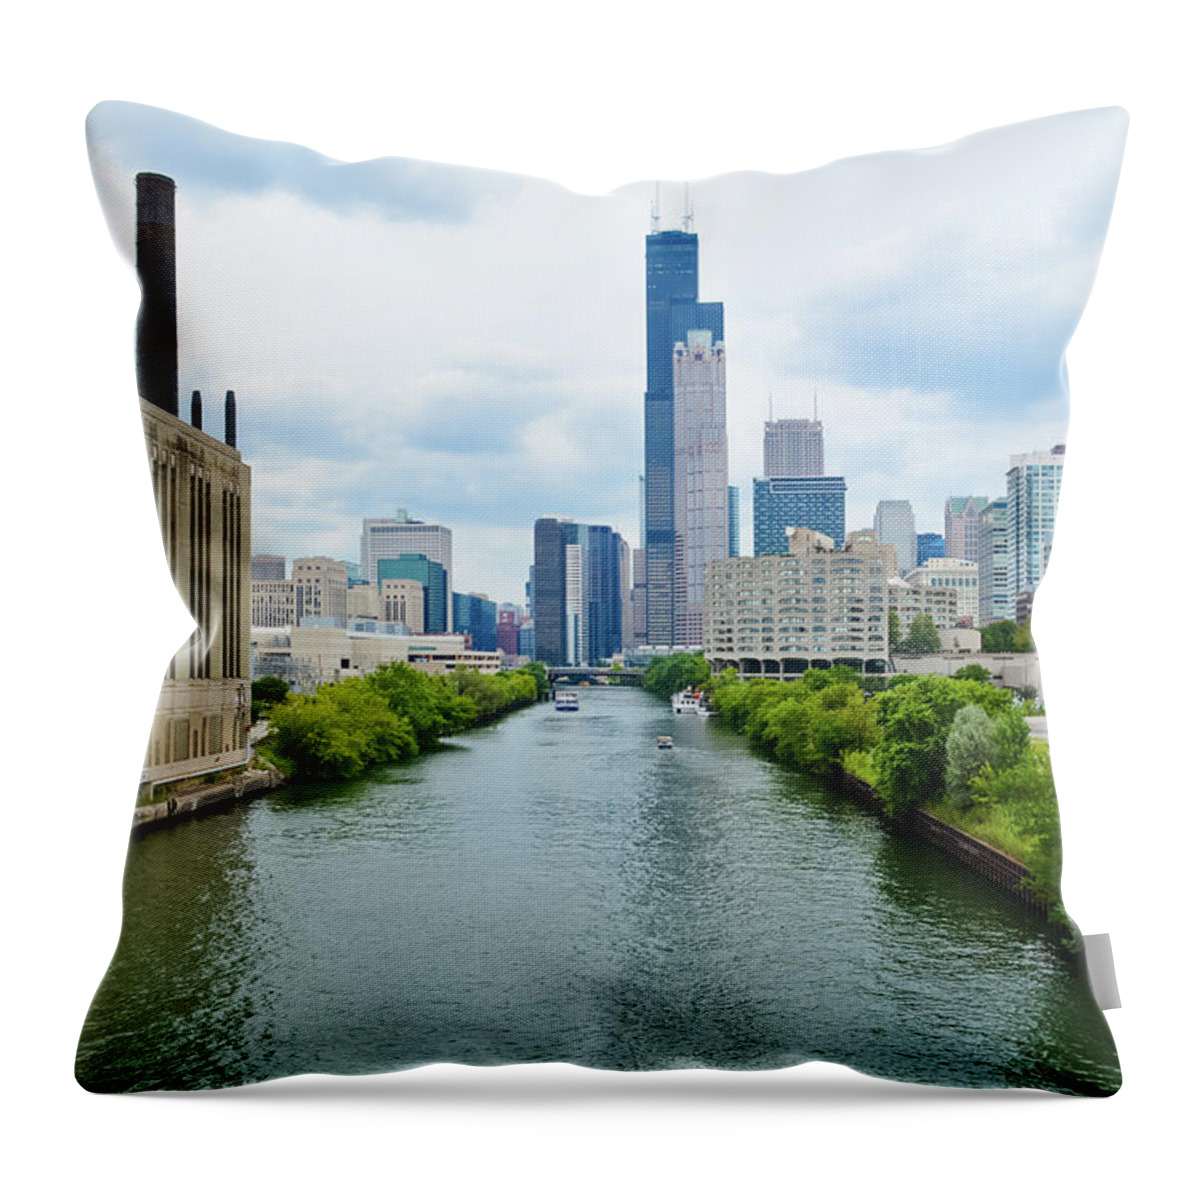 Chicago Throw Pillow featuring the photograph Chicago River South Loop by Kyle Hanson